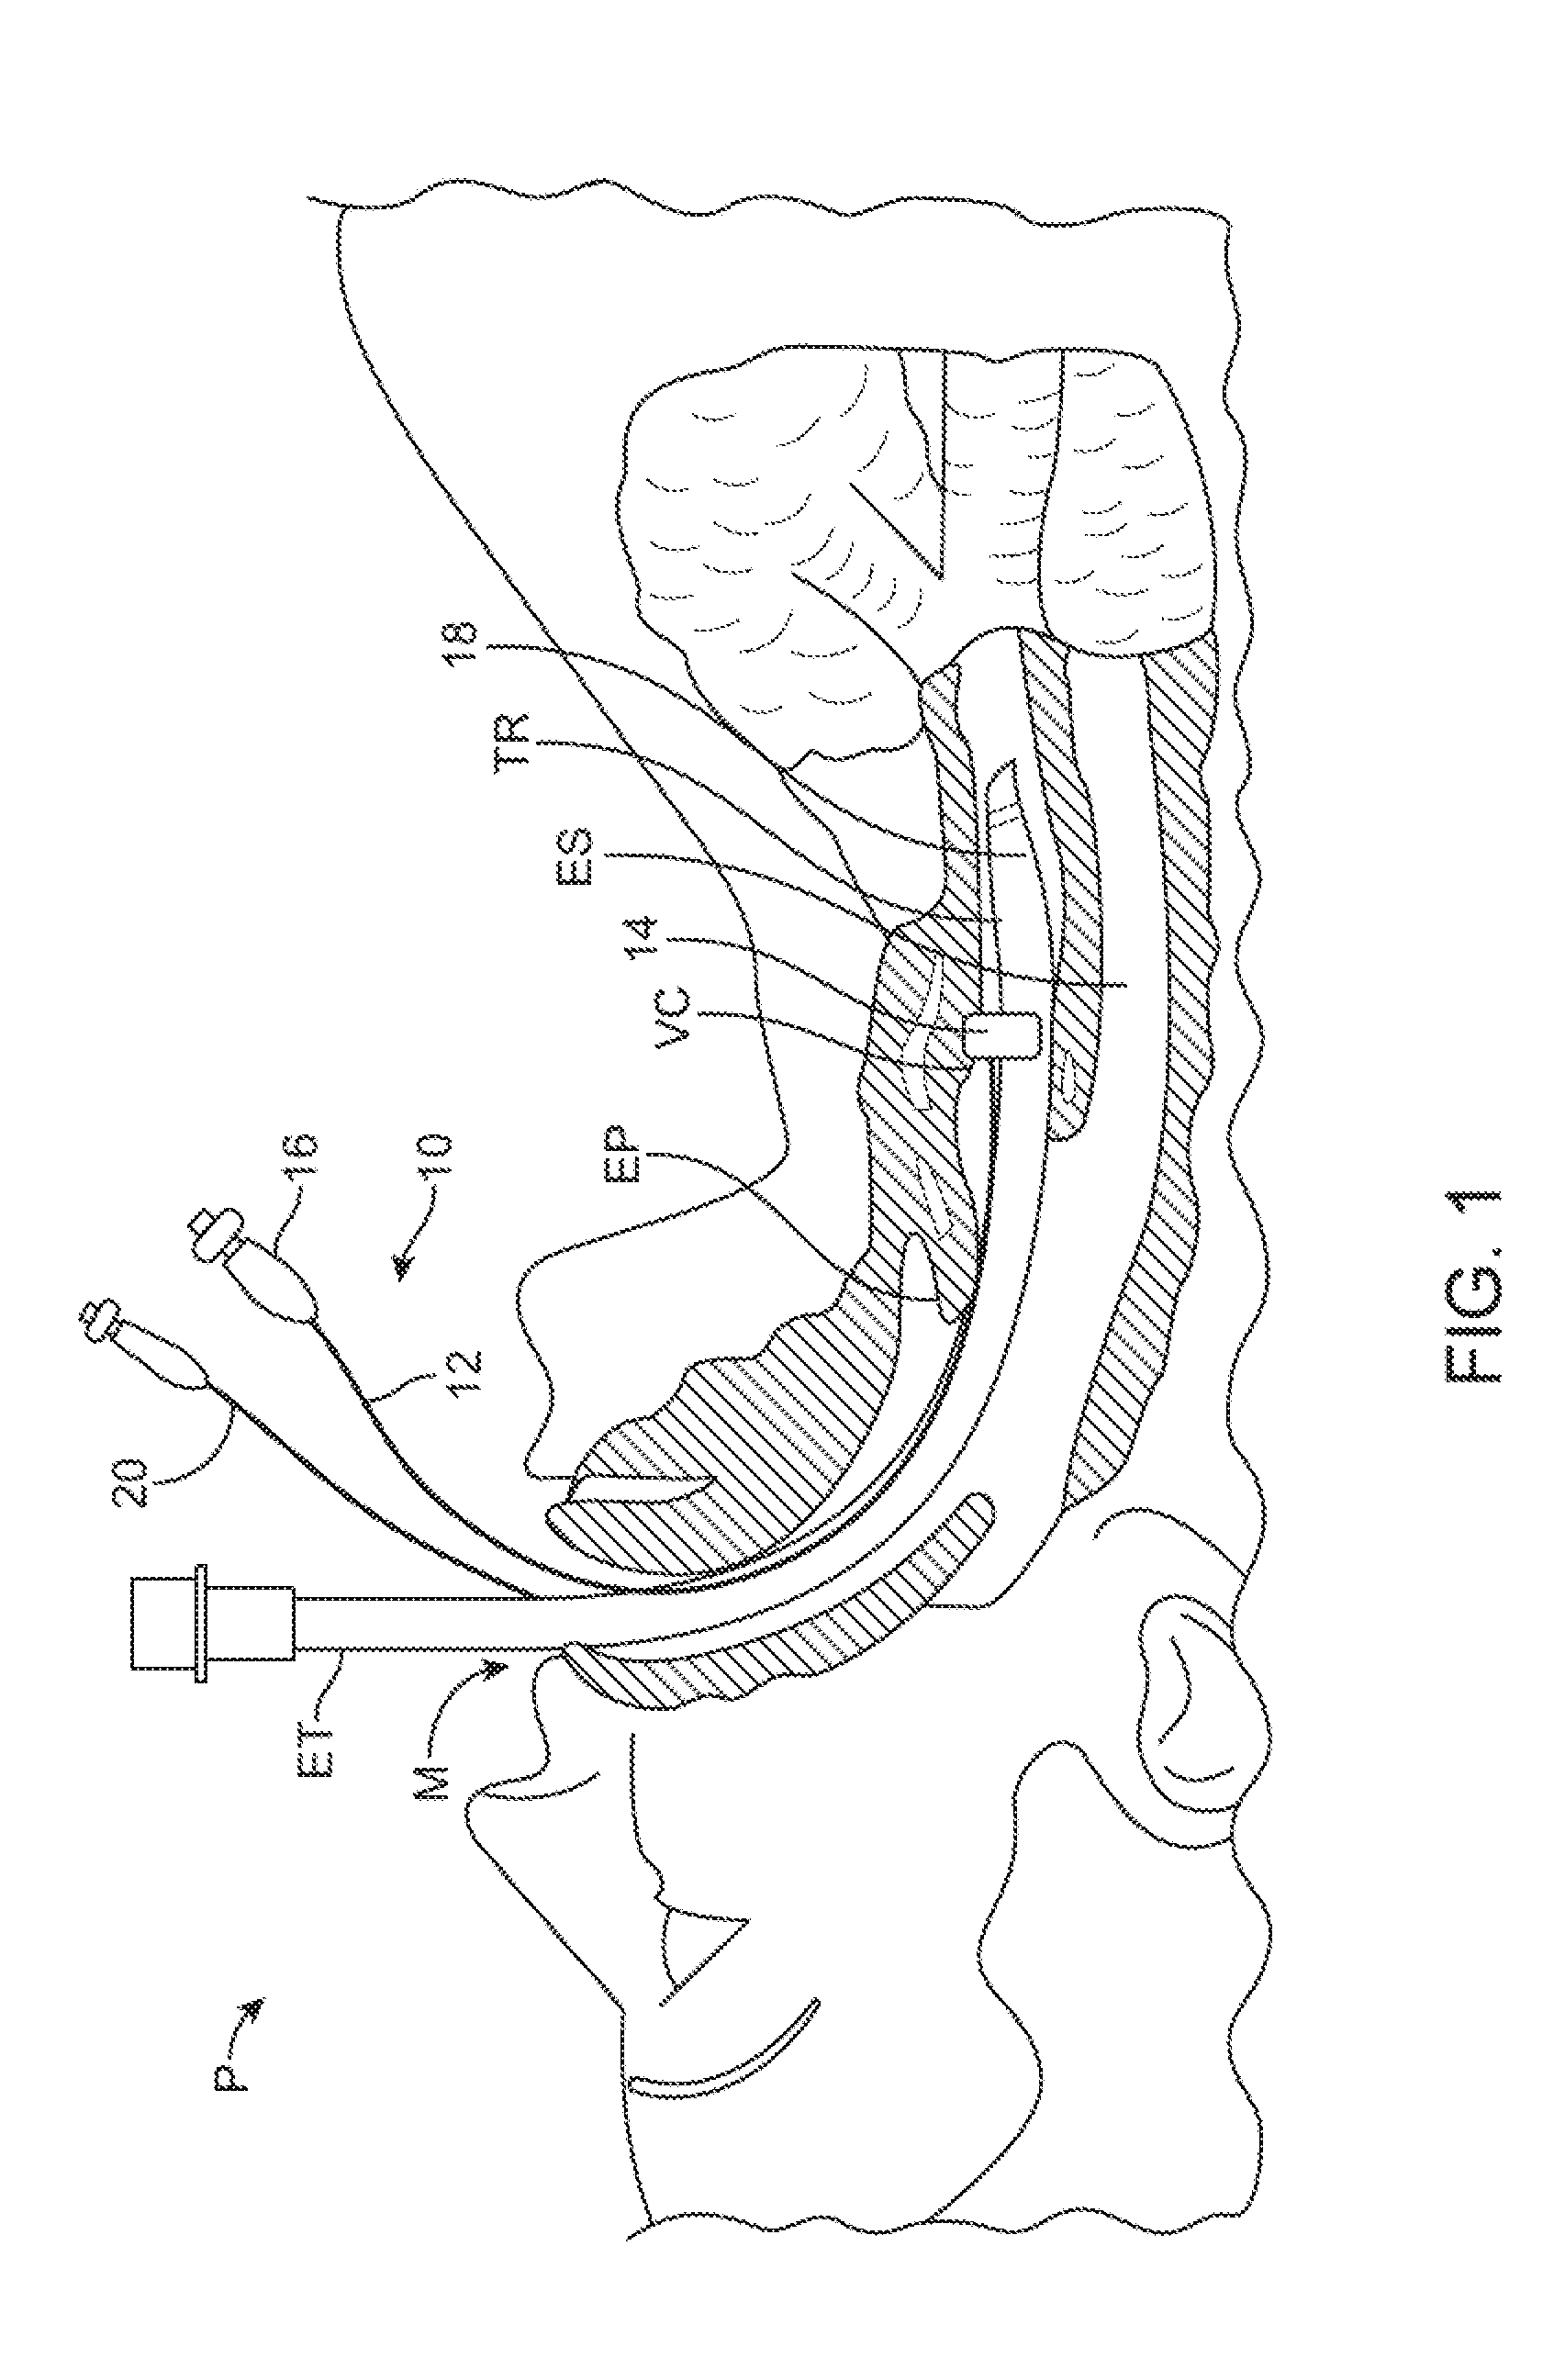 Devices and methods for preventing tracheal aspiration